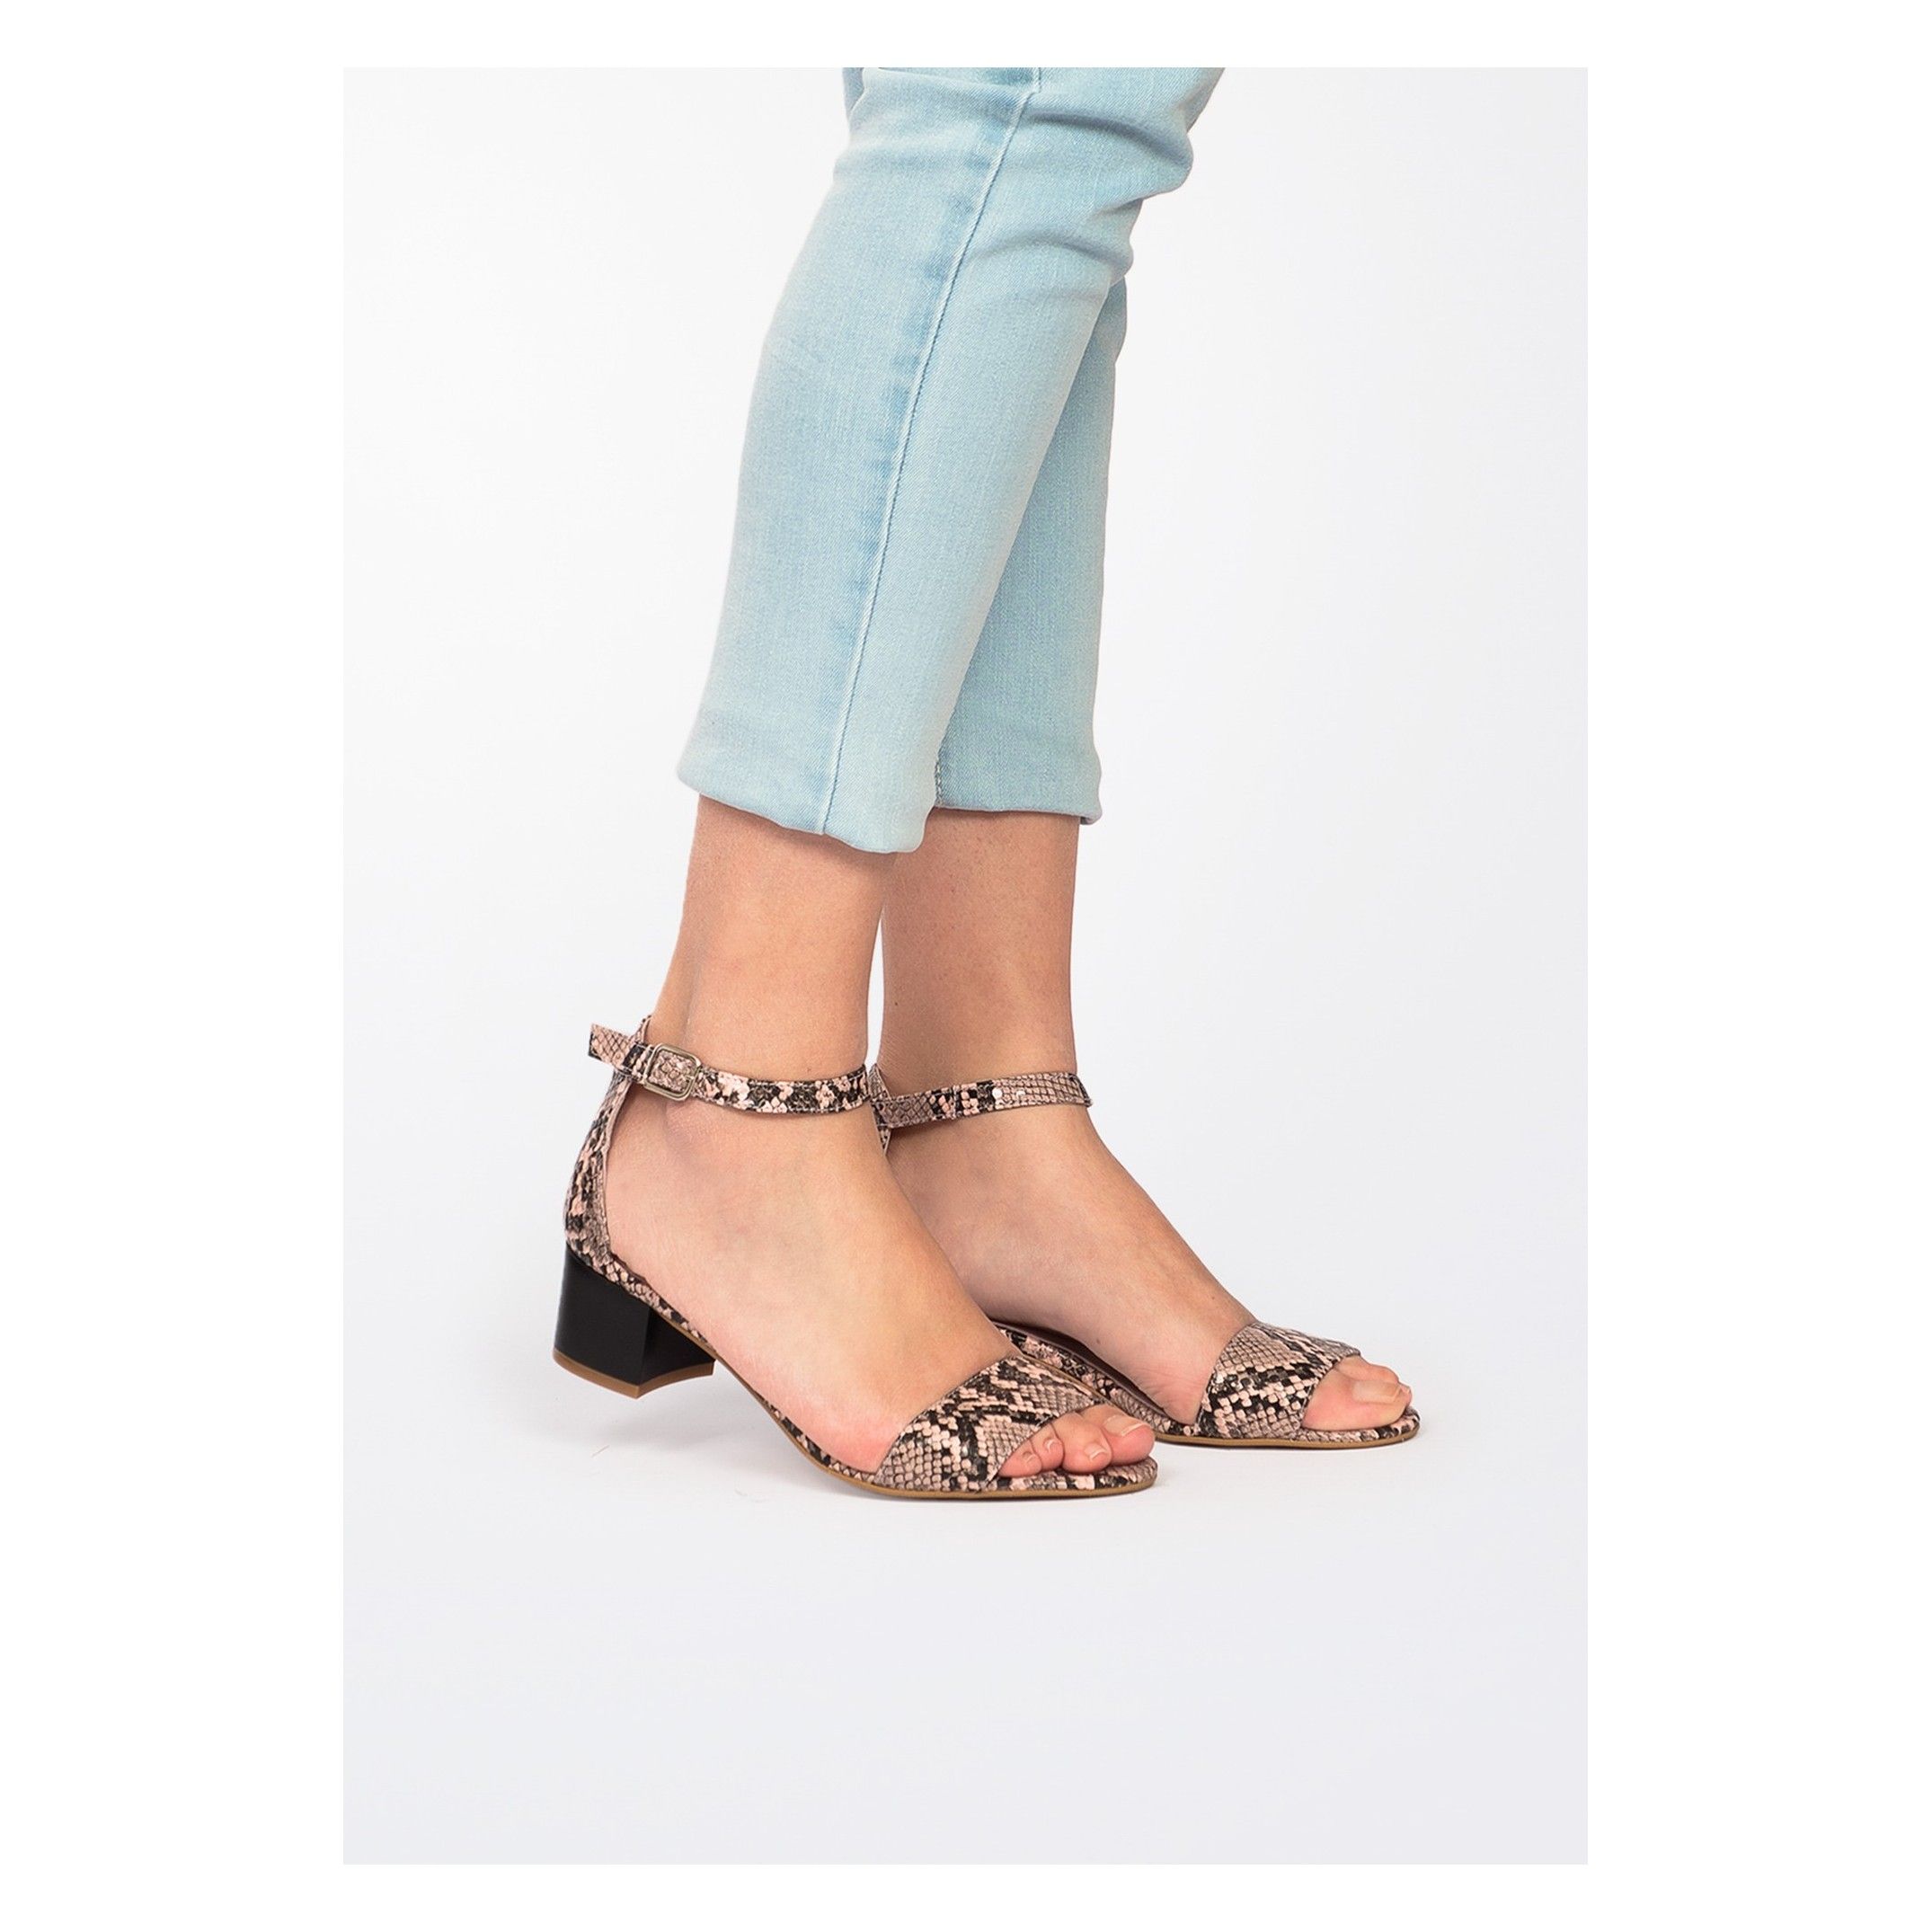 Classic sandals with heel for women. By Eva Lopez. Upper: leatherette. Closure: Metal buckle. Inner lining and insole: pig lining. Sole material: Cuerolite. Heel height: 4.5 cm. Designed and manufactured in Spain.